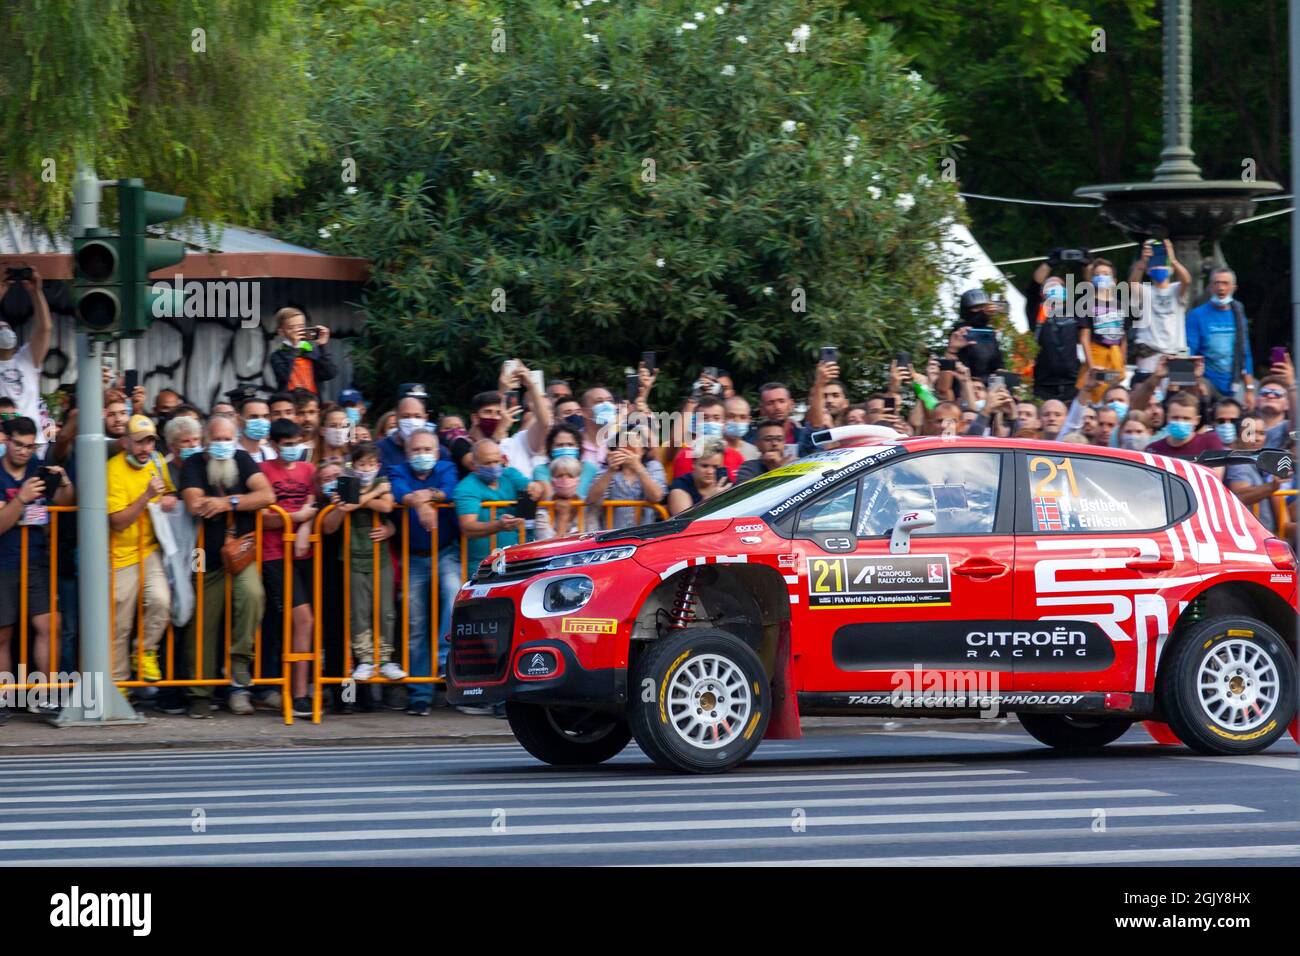 Racing car Citroen C3 WRC, of TRT World Rally Team, during the first stage of Rally Acropolis 2021, held in Athens, Greece. Stock Photo